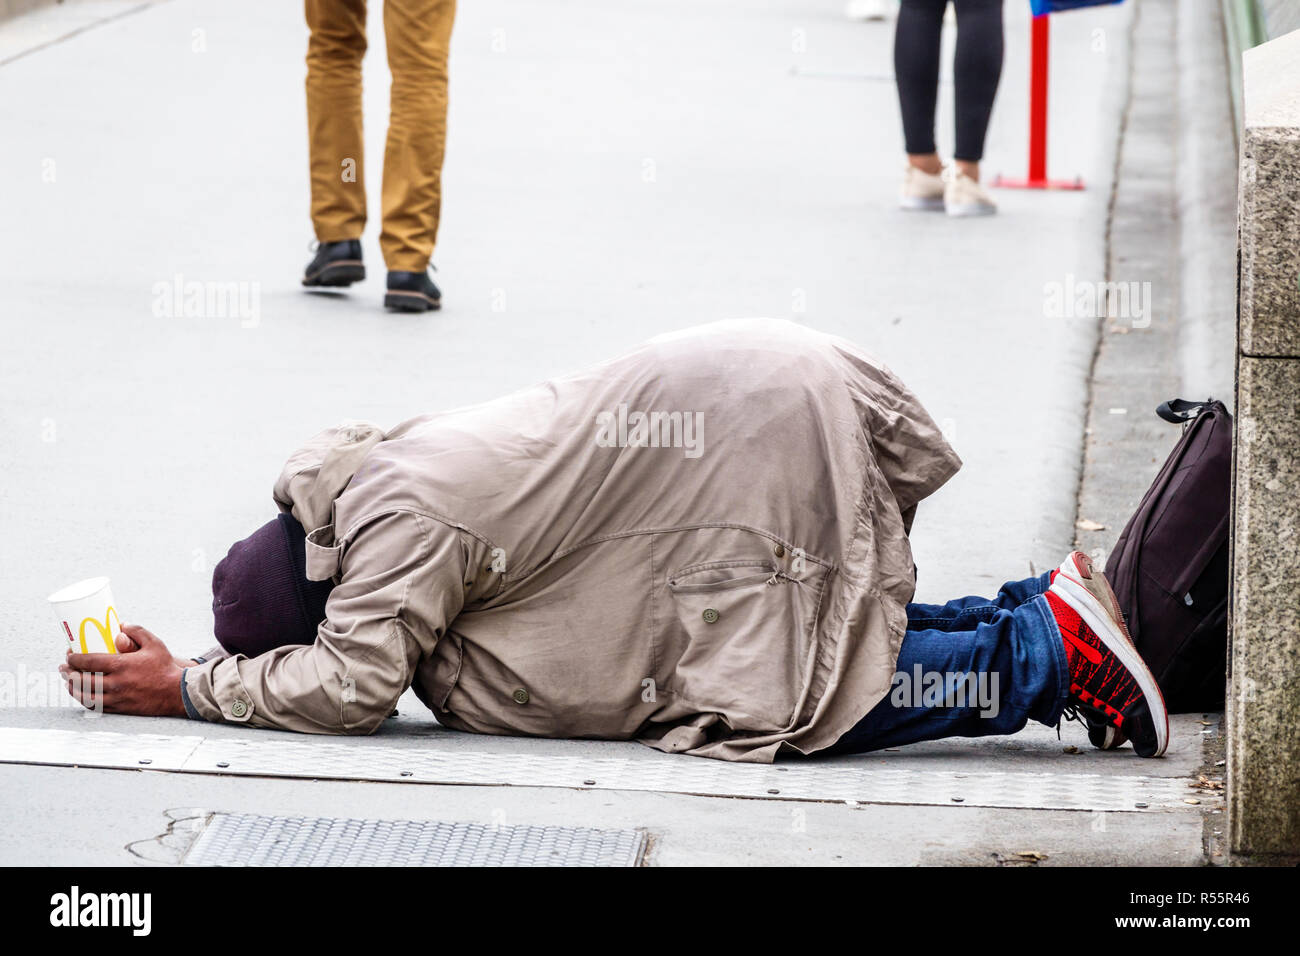 London England,UK,Westminster Bridge,Thames River,Asian man men male,prostrated on ground,holding McDonald's cup,begging,street beggar,UK GB English E Stock Photo